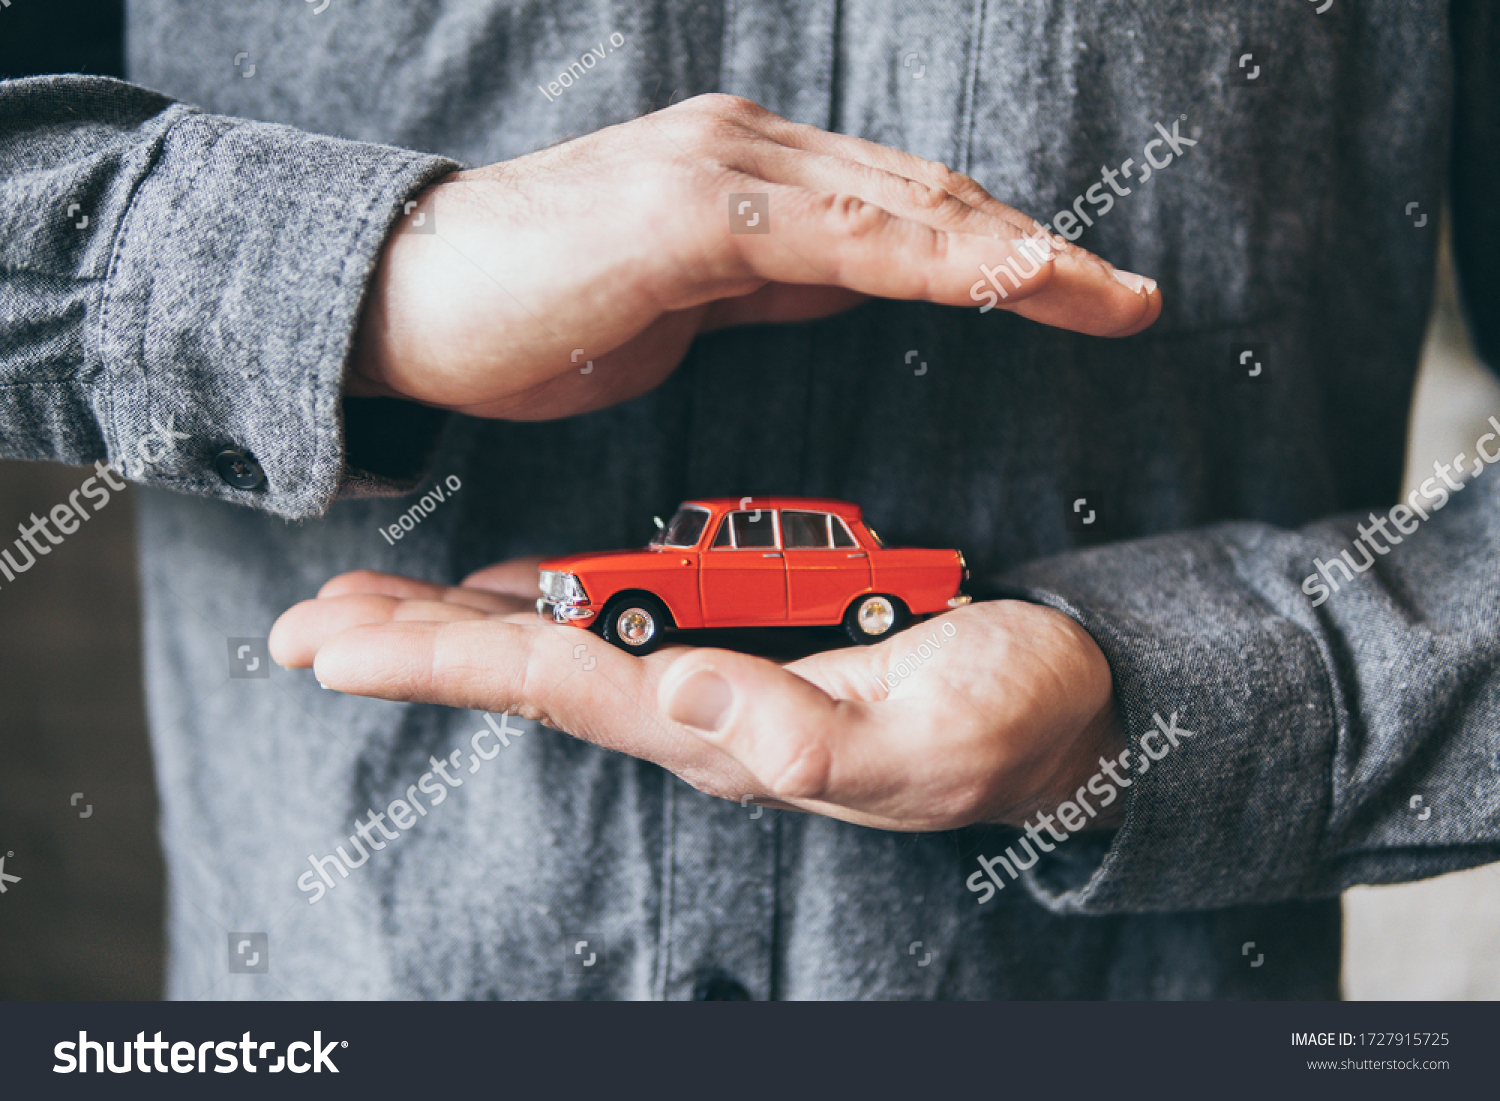 Male hands holding and protecting a red toy car. Conceptual image of insurance and road safety. #1727915725